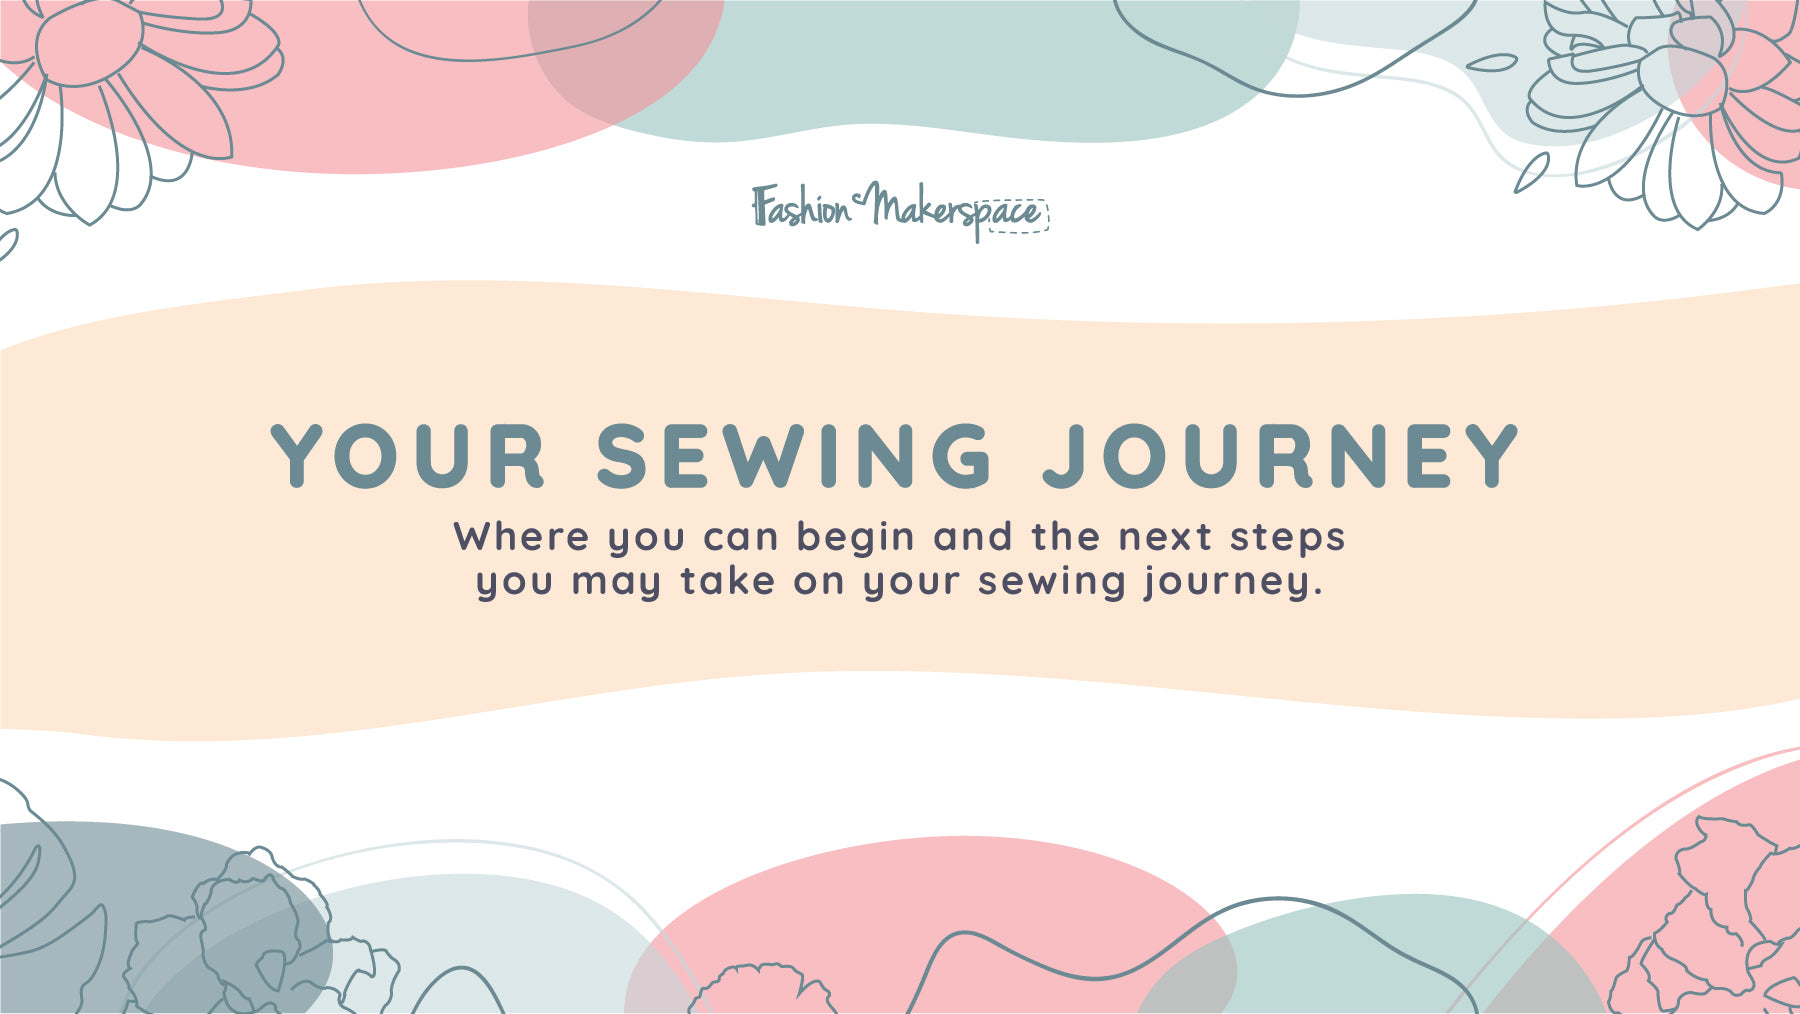 Want to pick up some sewing skills but don’t know where to start?